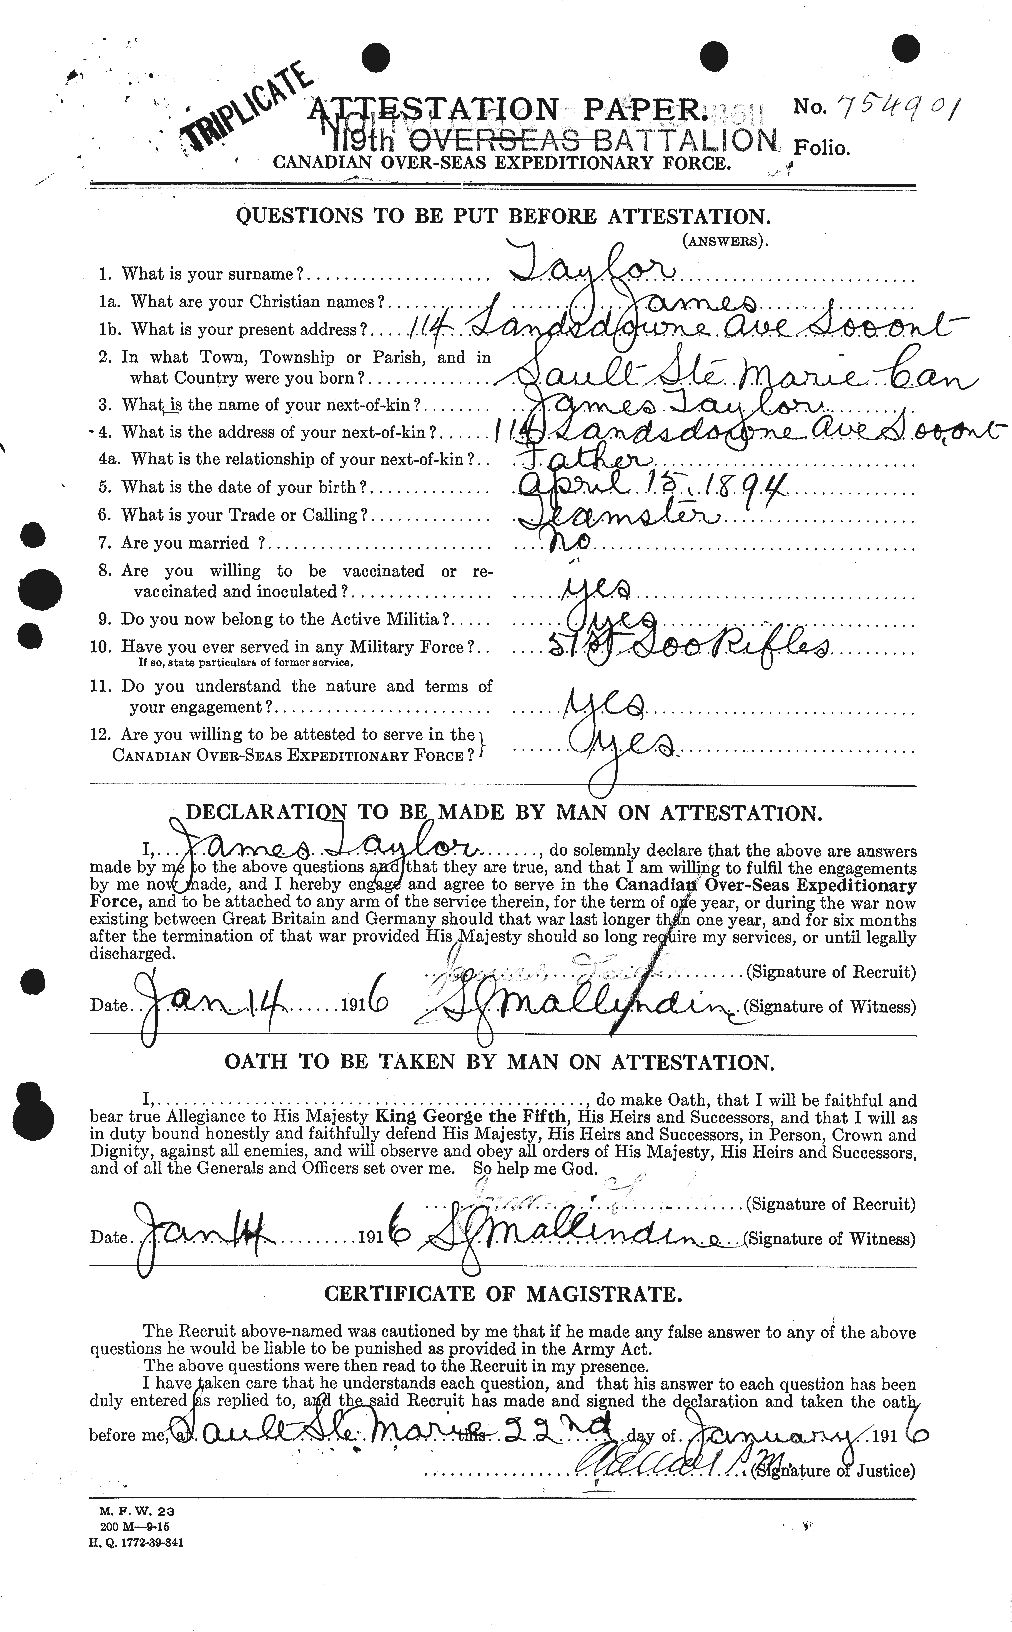 Personnel Records of the First World War - CEF 626680a